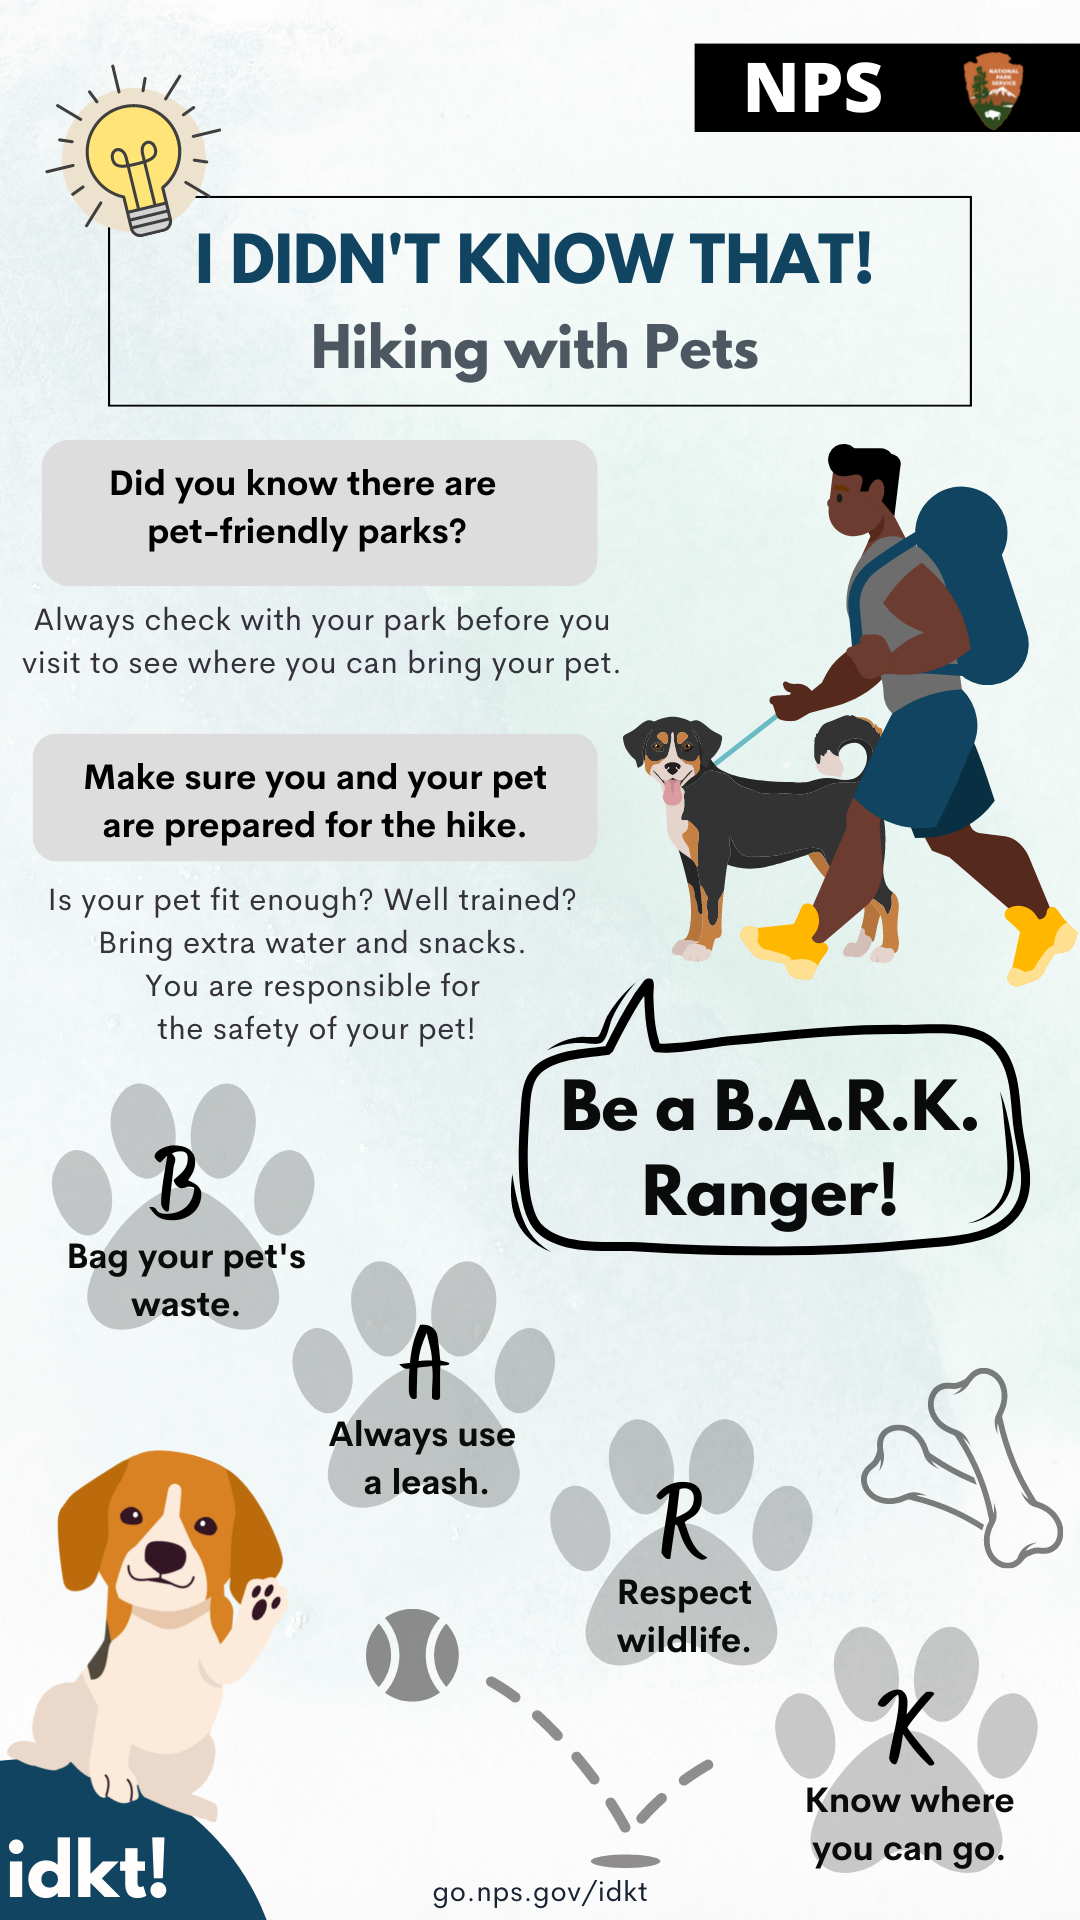 An infographic showing with tips on Hiking with Pets. Full text description available below image